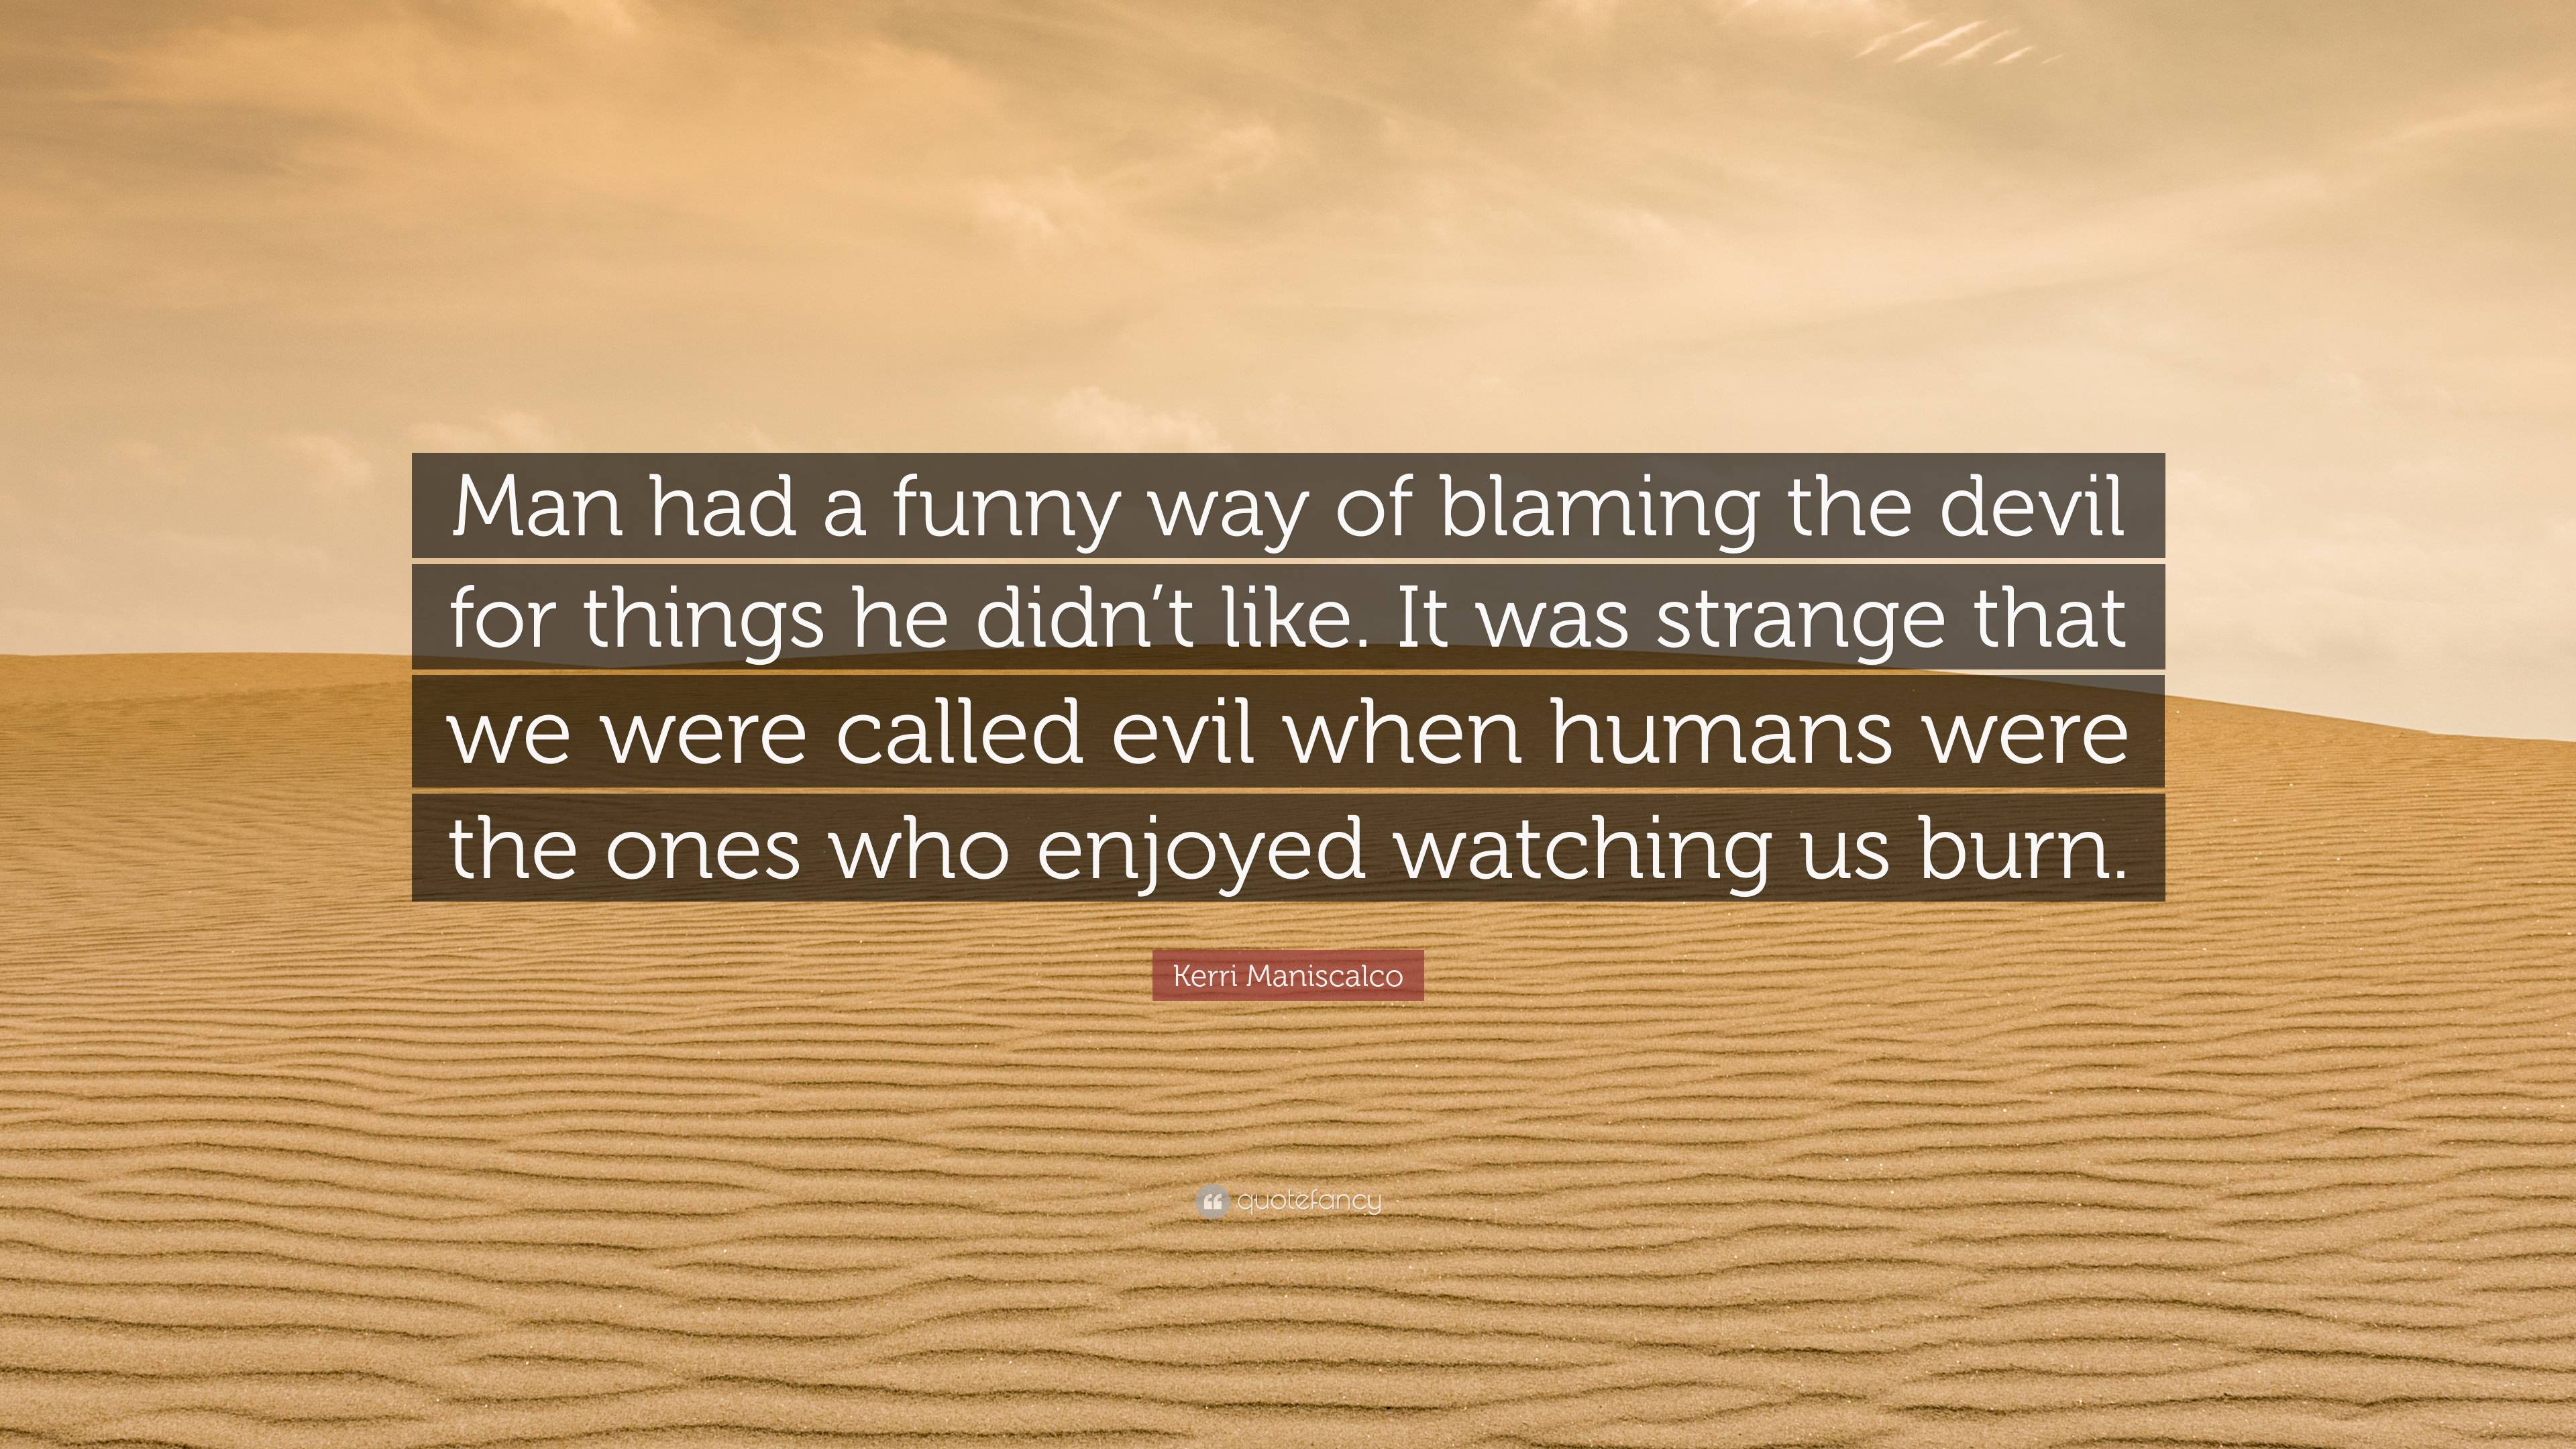 Kerri Maniscalco Quote: “Man had a funny way of blaming the devil for ...